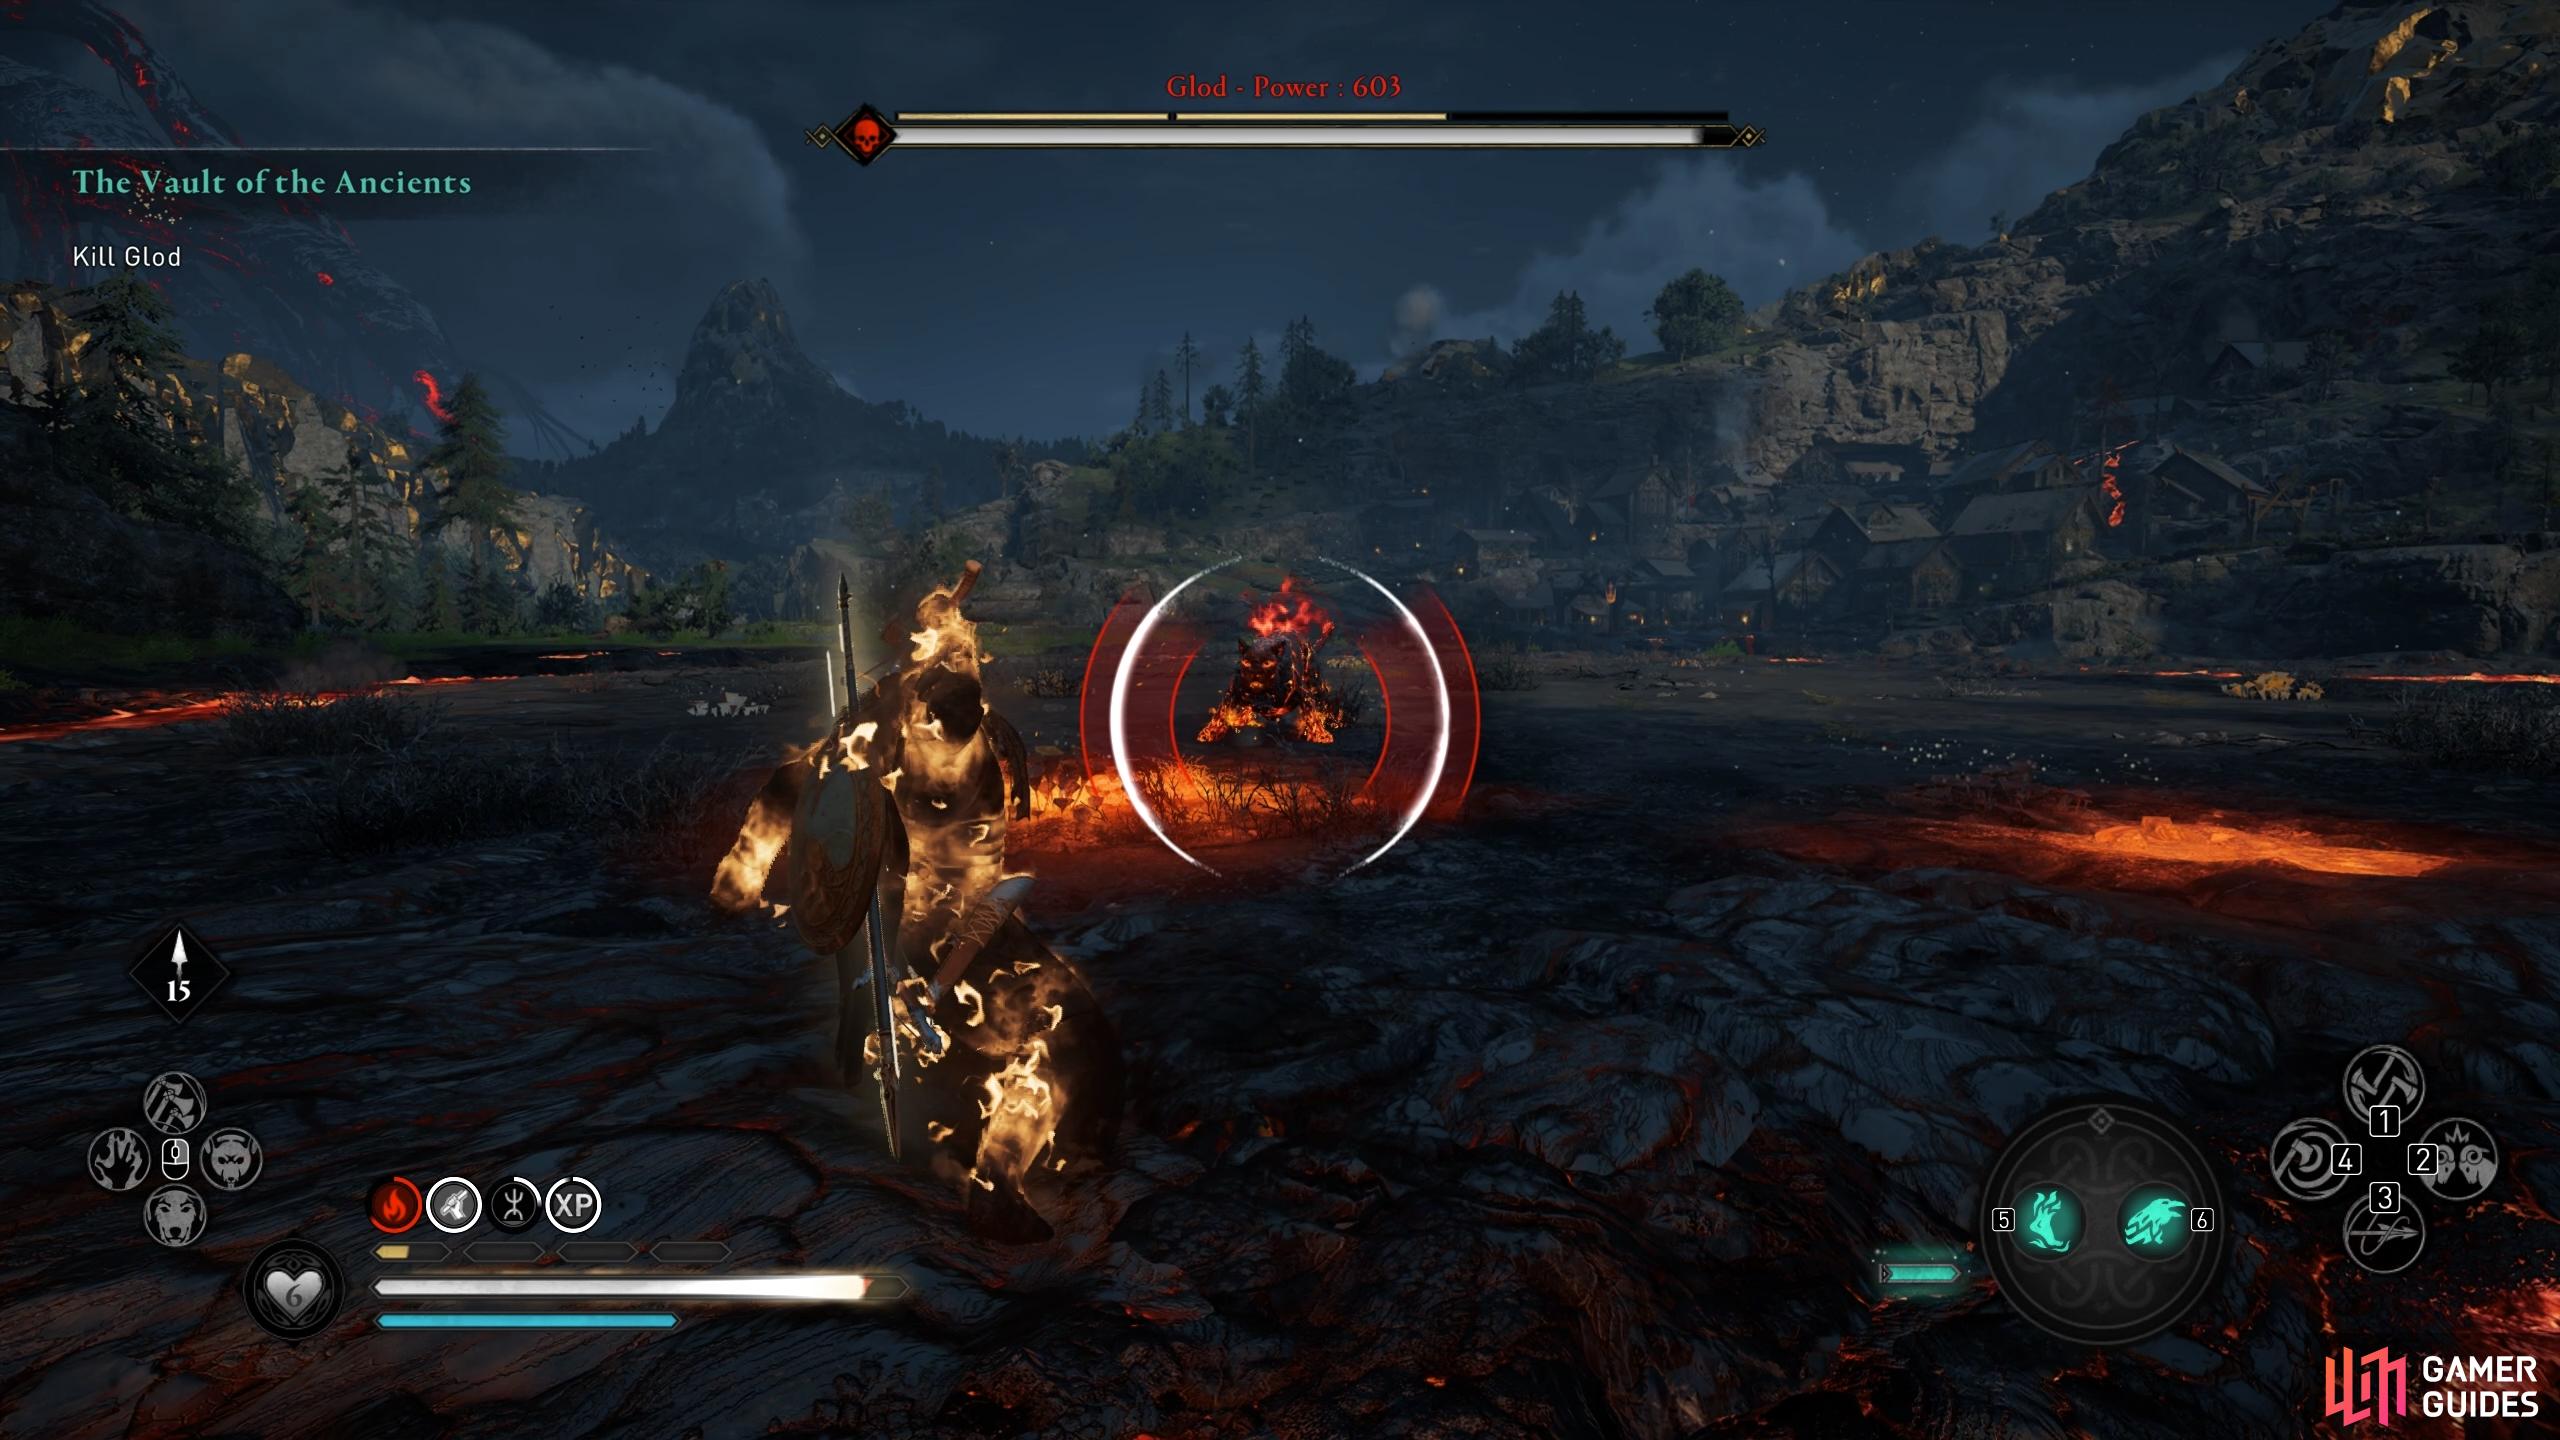 Youll need to use special abilities which target weak points, such as Precision Axe Throw, if you want to execute a stun attack early.